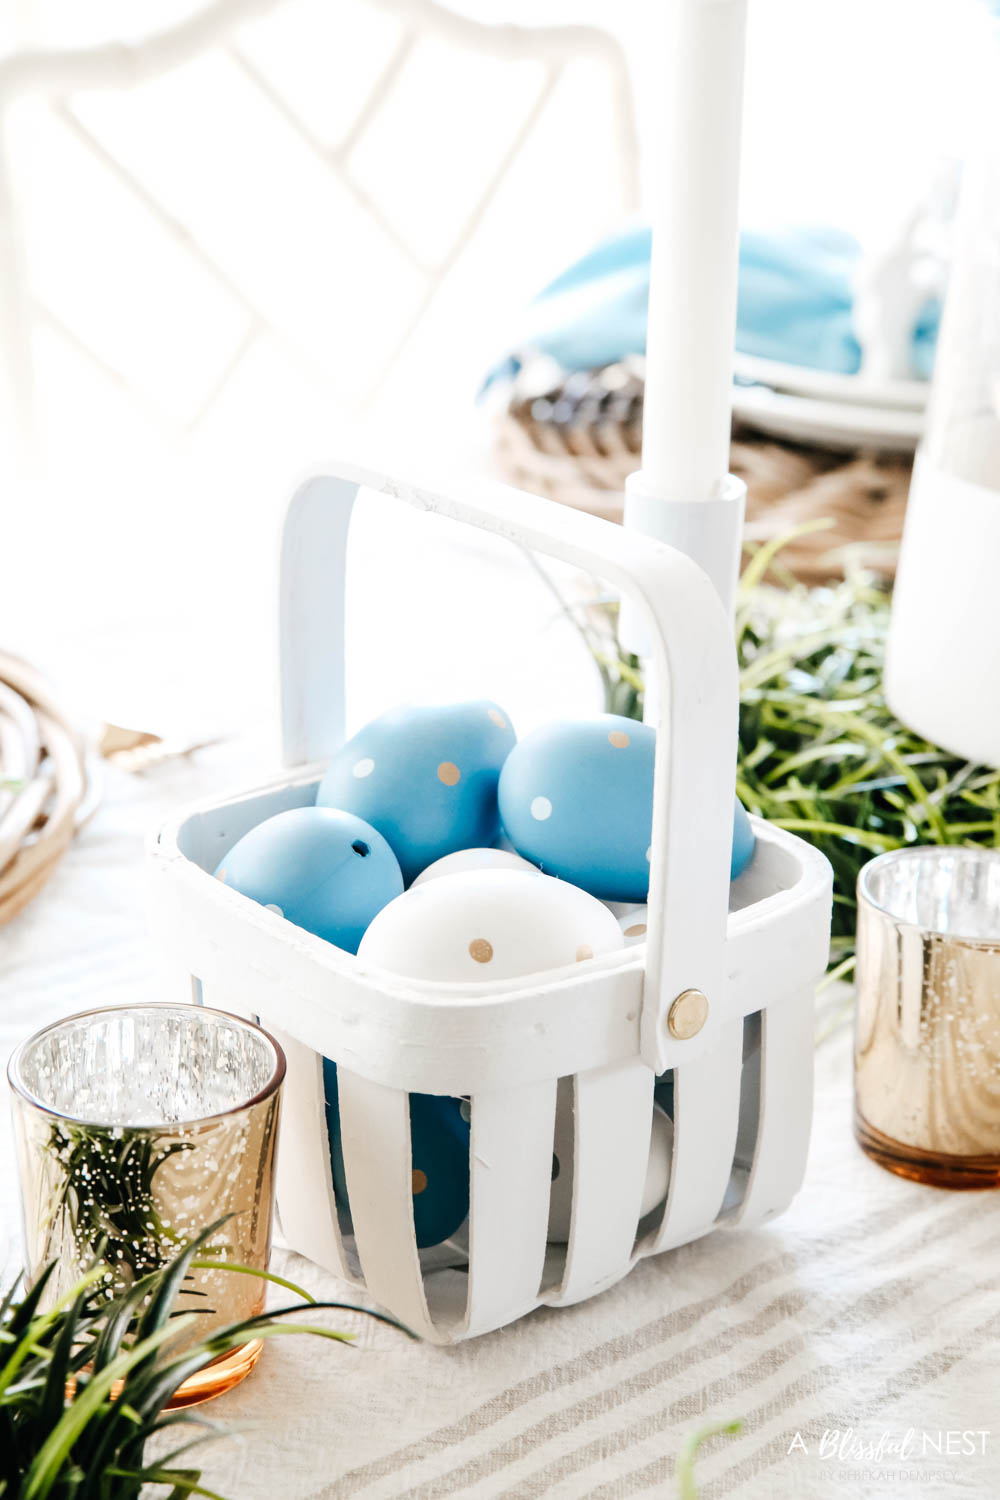 Decorate small white basket with blue and white eggs inside for decor